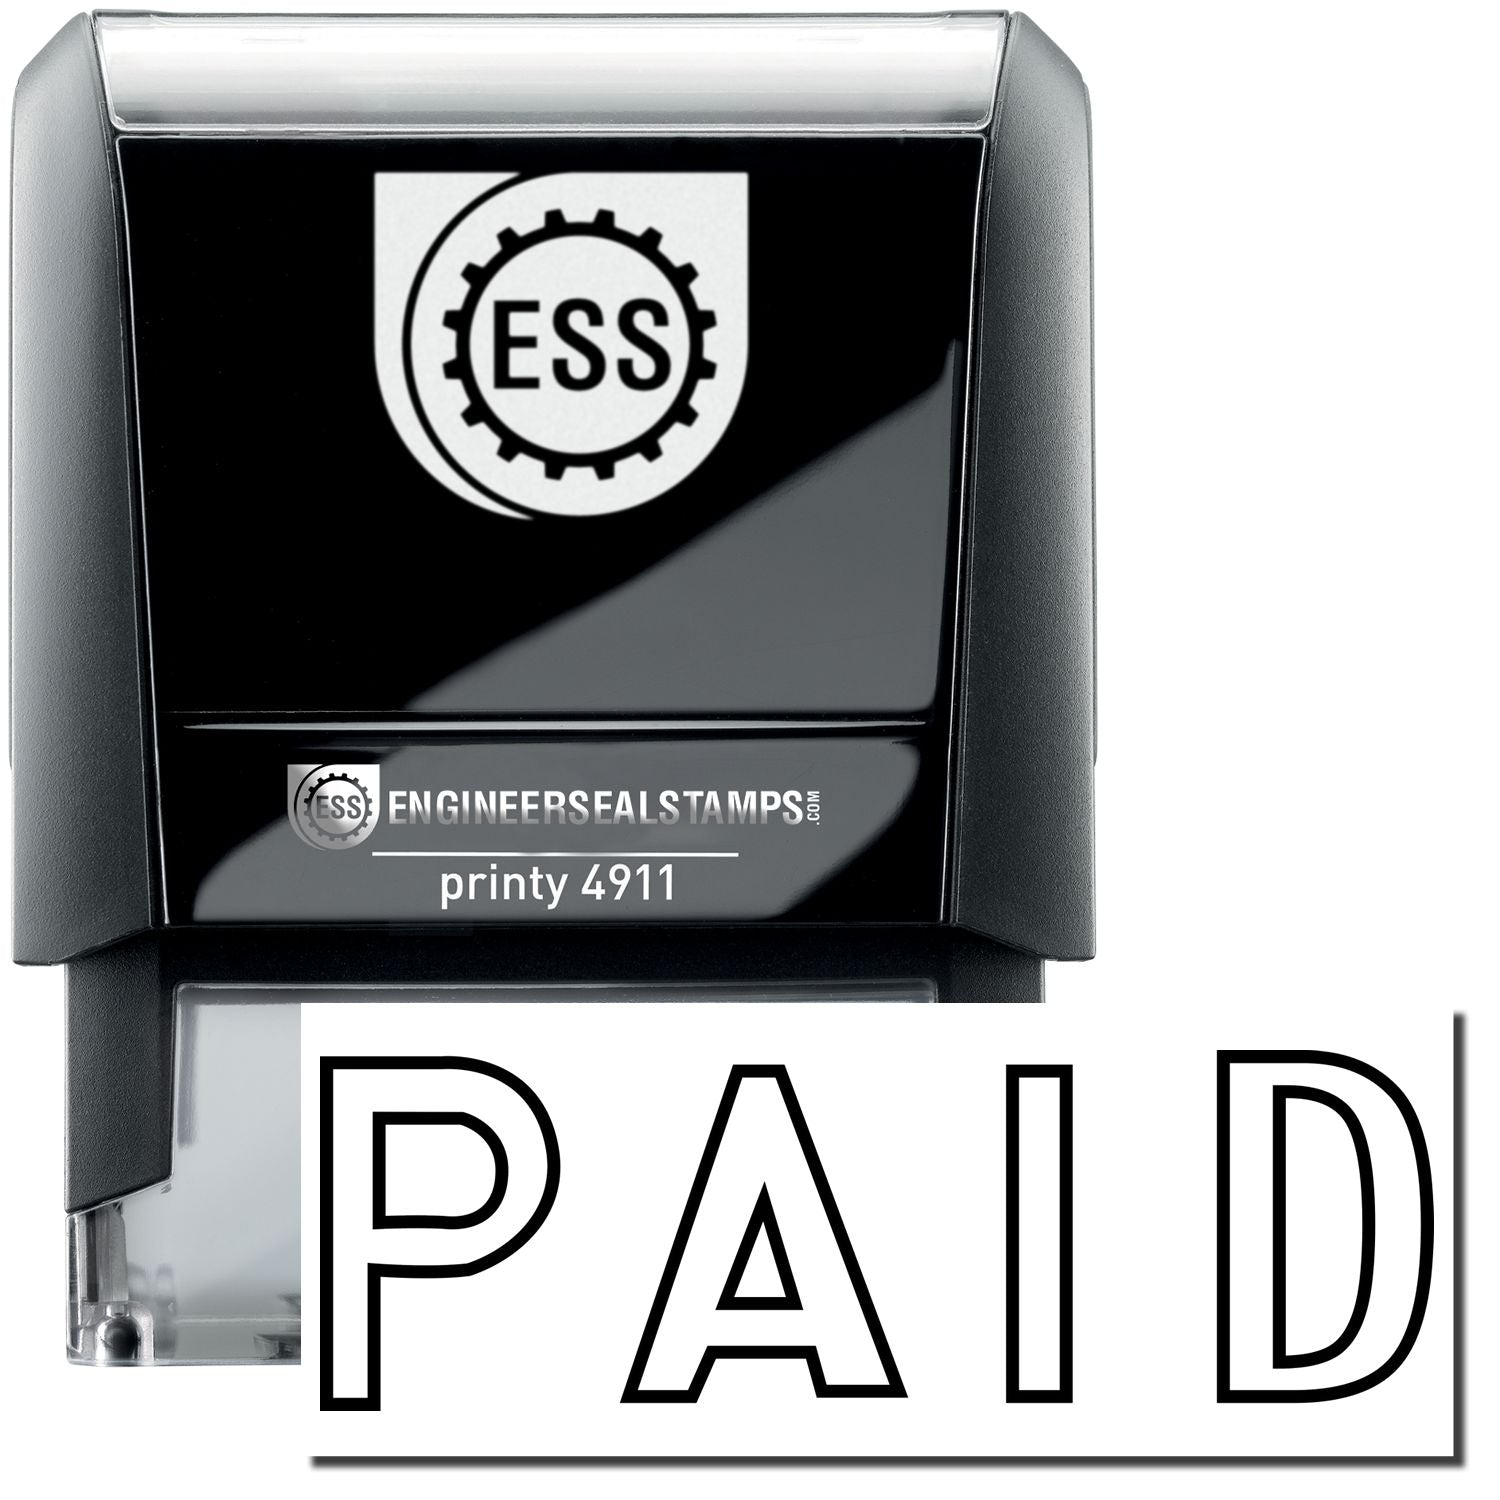 A self-inking stamp with a stamped image showing how the text "PAID" in an outline style is displayed after stamping.